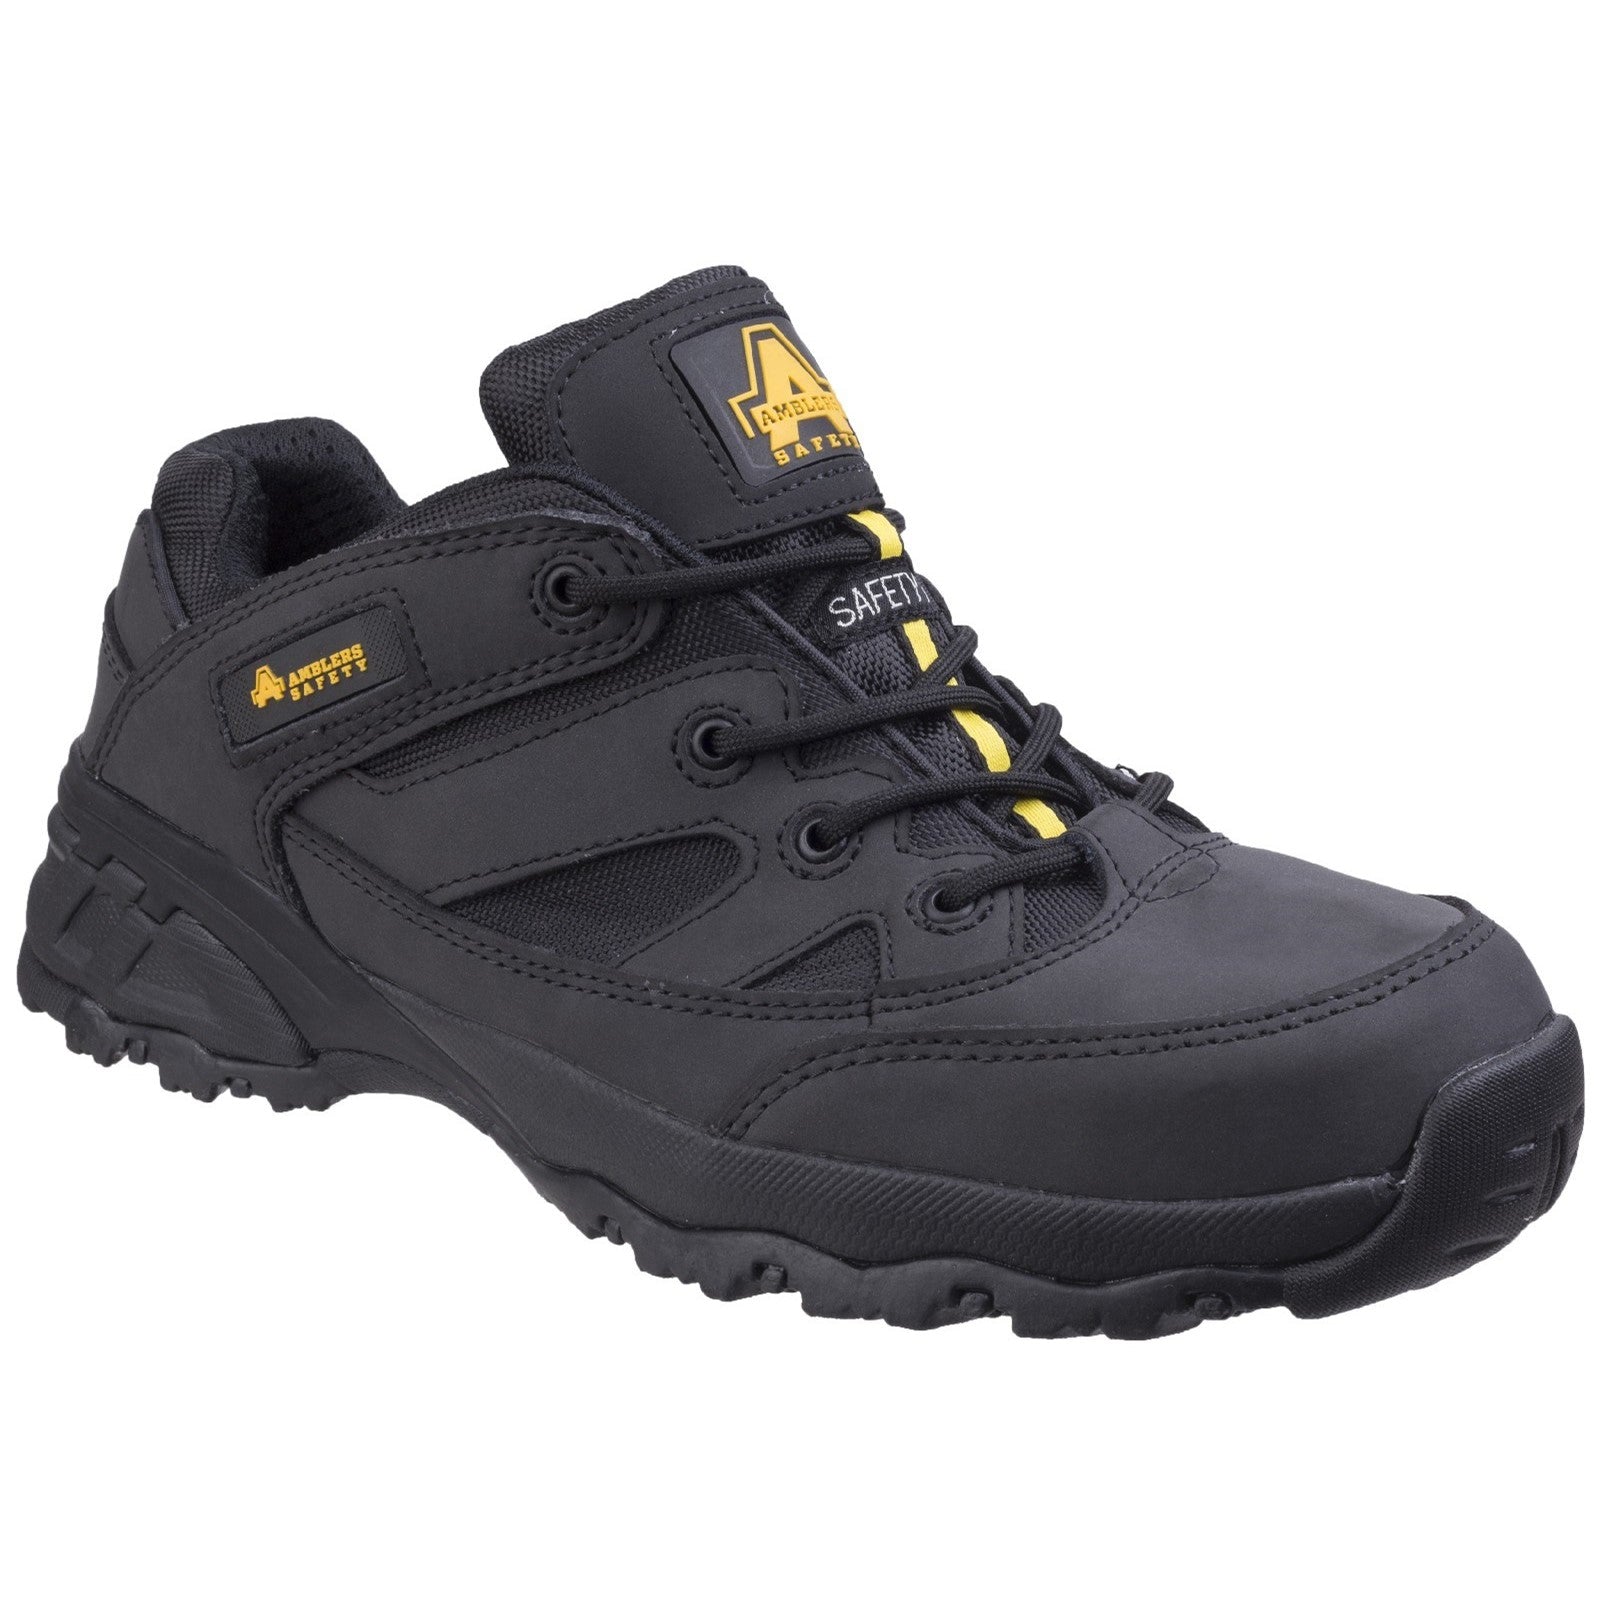 FS68C Fully Composite Metal Free Safety Trainer, Amblers Safety